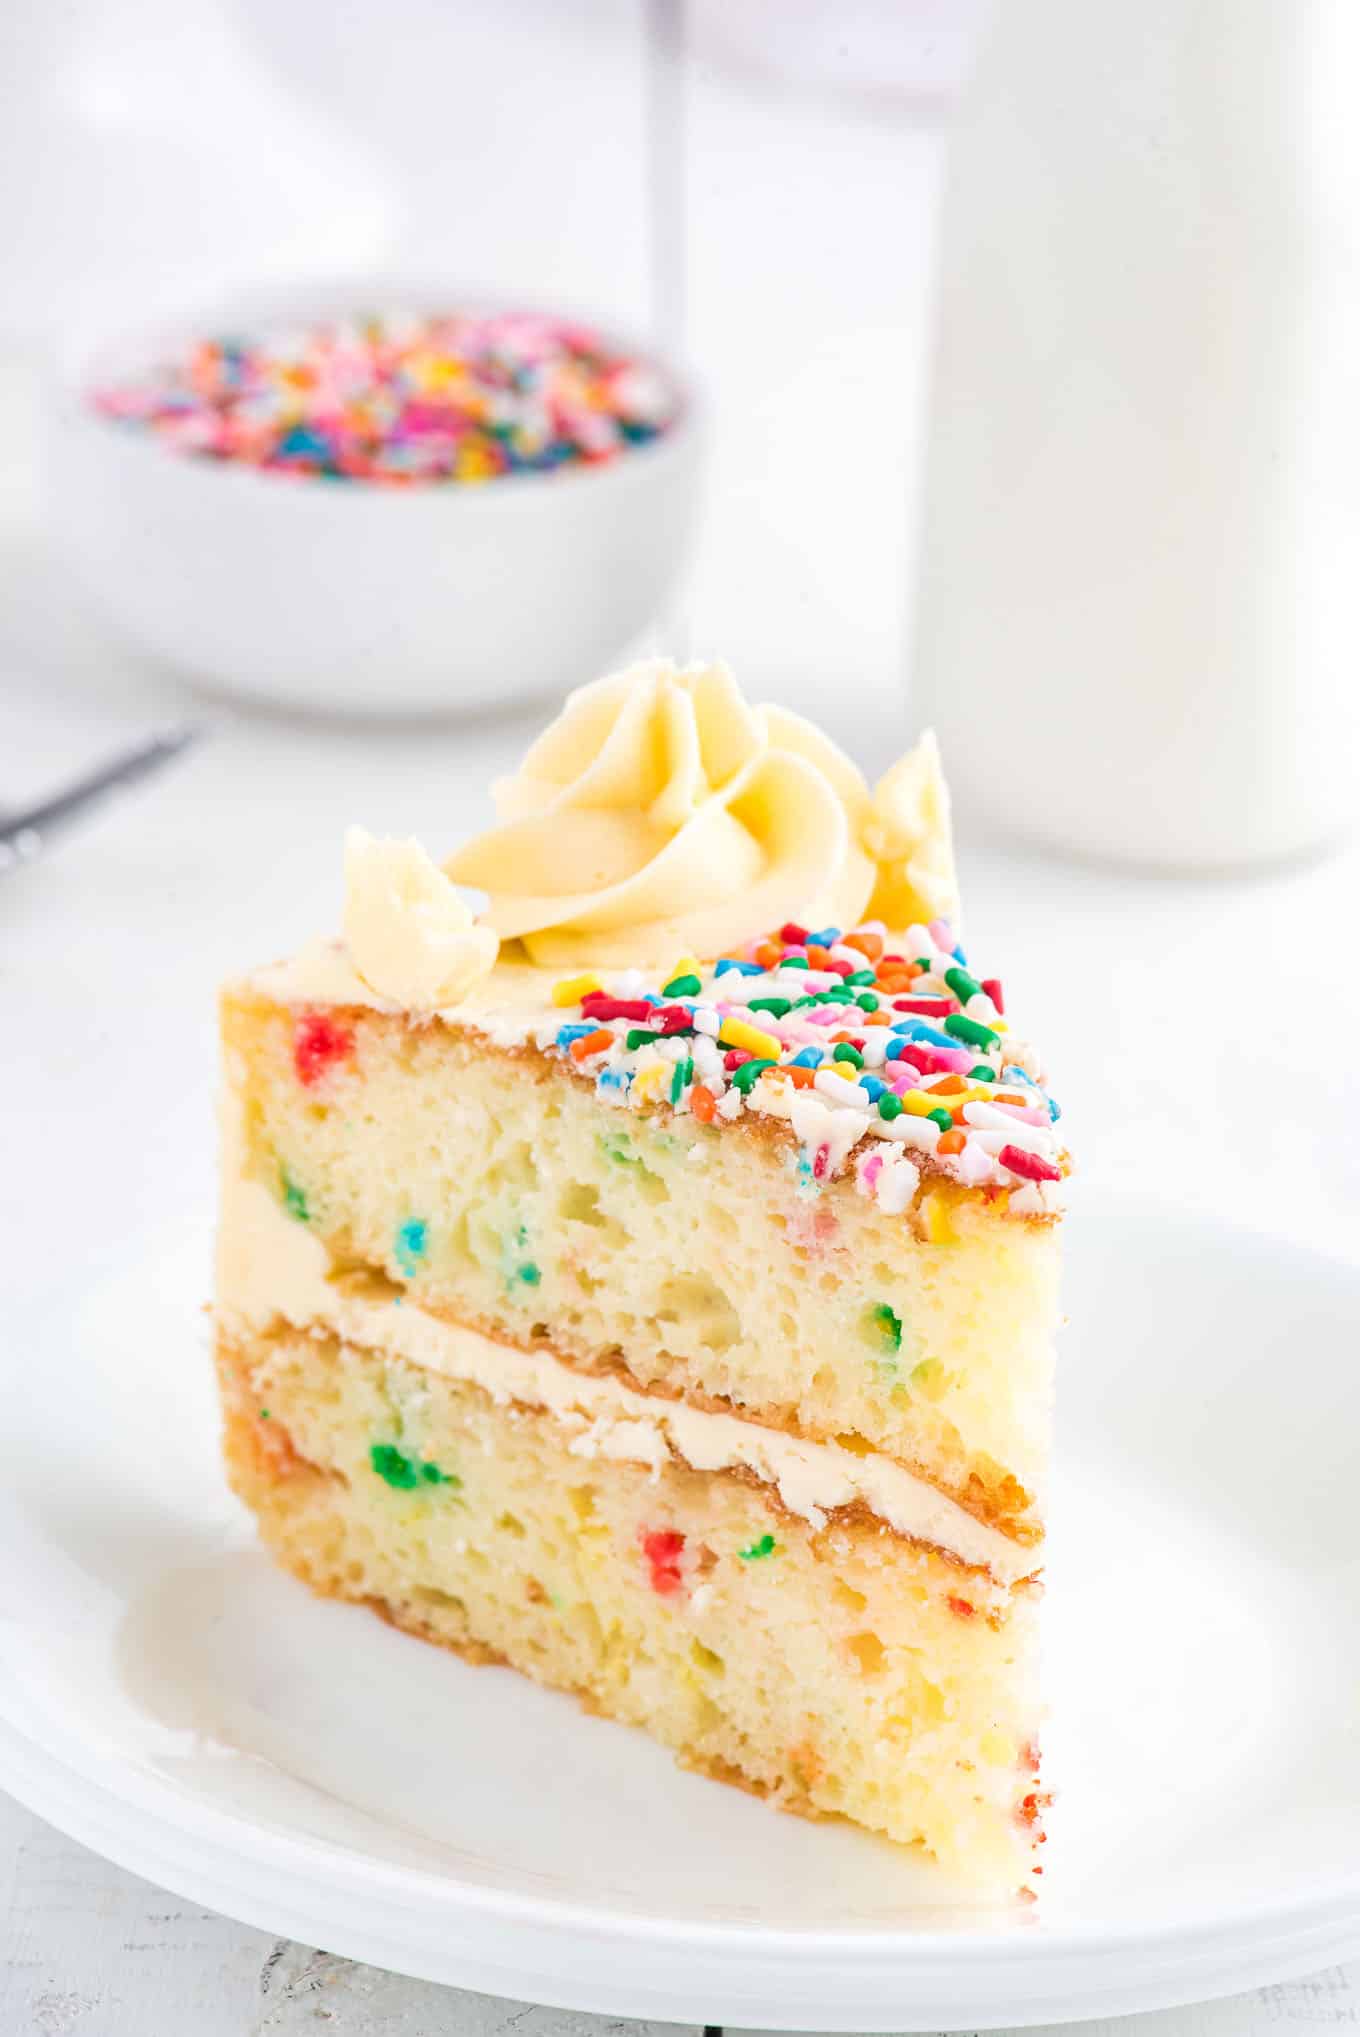 A slice of funfetti cake on a plate with a bowl of sprinkles and jar of milk in the background.